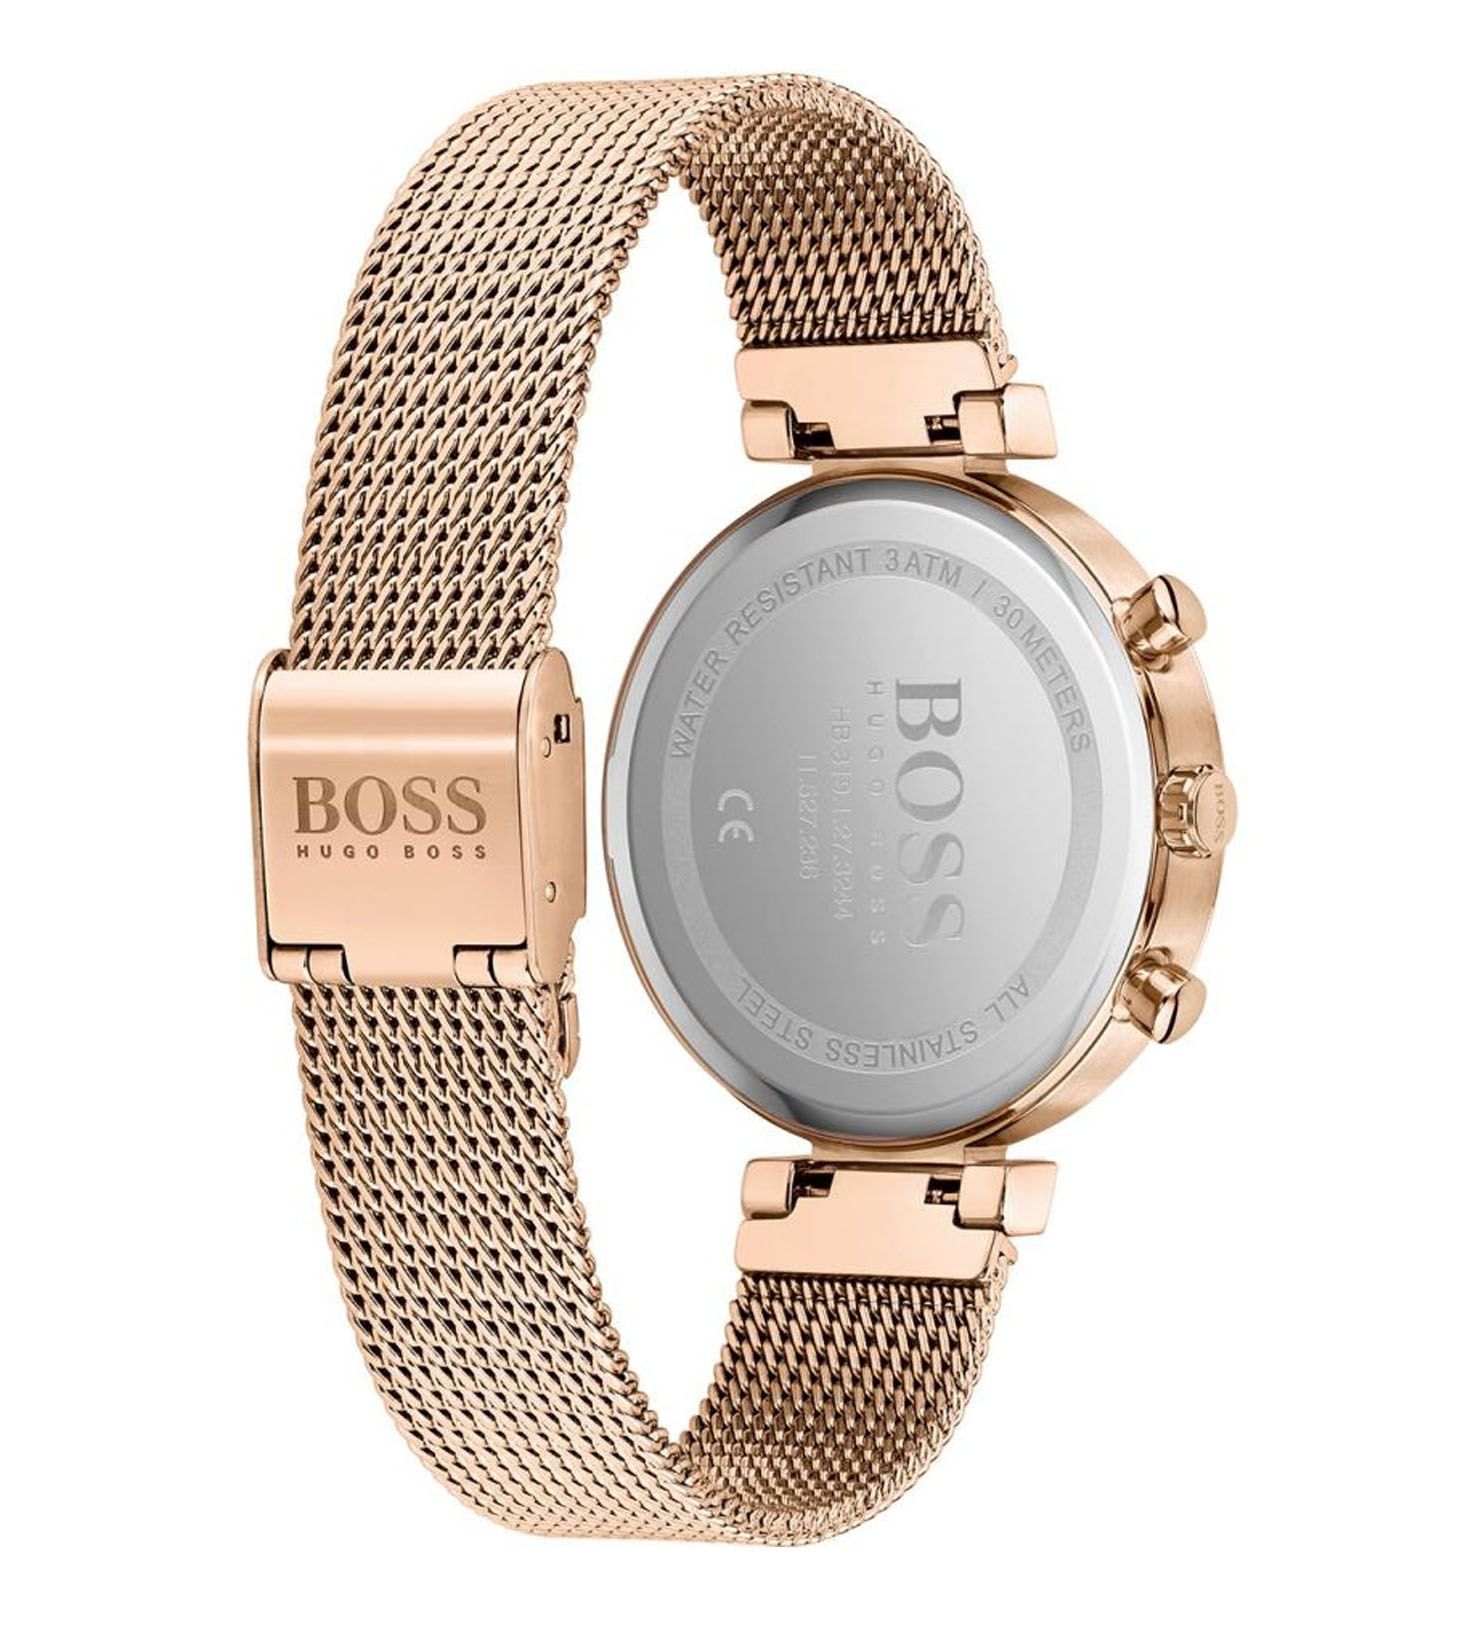 This Hugo Boss Flawless Multi Dial Watch for Women is the perfect timepiece to wear or to gift. It's Rose gold 36 mm Round case combined with the comfortable Rose Gold Stainless steel will ensure you enjoy this stunning timepiece without any compromise. Operated by a high quality Quartz movement and water resistant to 3 bars, your watch will keep ticking. This Elegant and practical watch is perfect for all occasions.  It’s a great gift for your relatives and friends - The watch has a Calendar function: Day-Date, 24-hour Display High quality 19 cm length and  15 mm width Rose Gold Stainless steel strap with a Fold over clasp Case diameter: 36 mm,case thickness: 9 mm, case colour: Rose Gold and dial colour: Silver